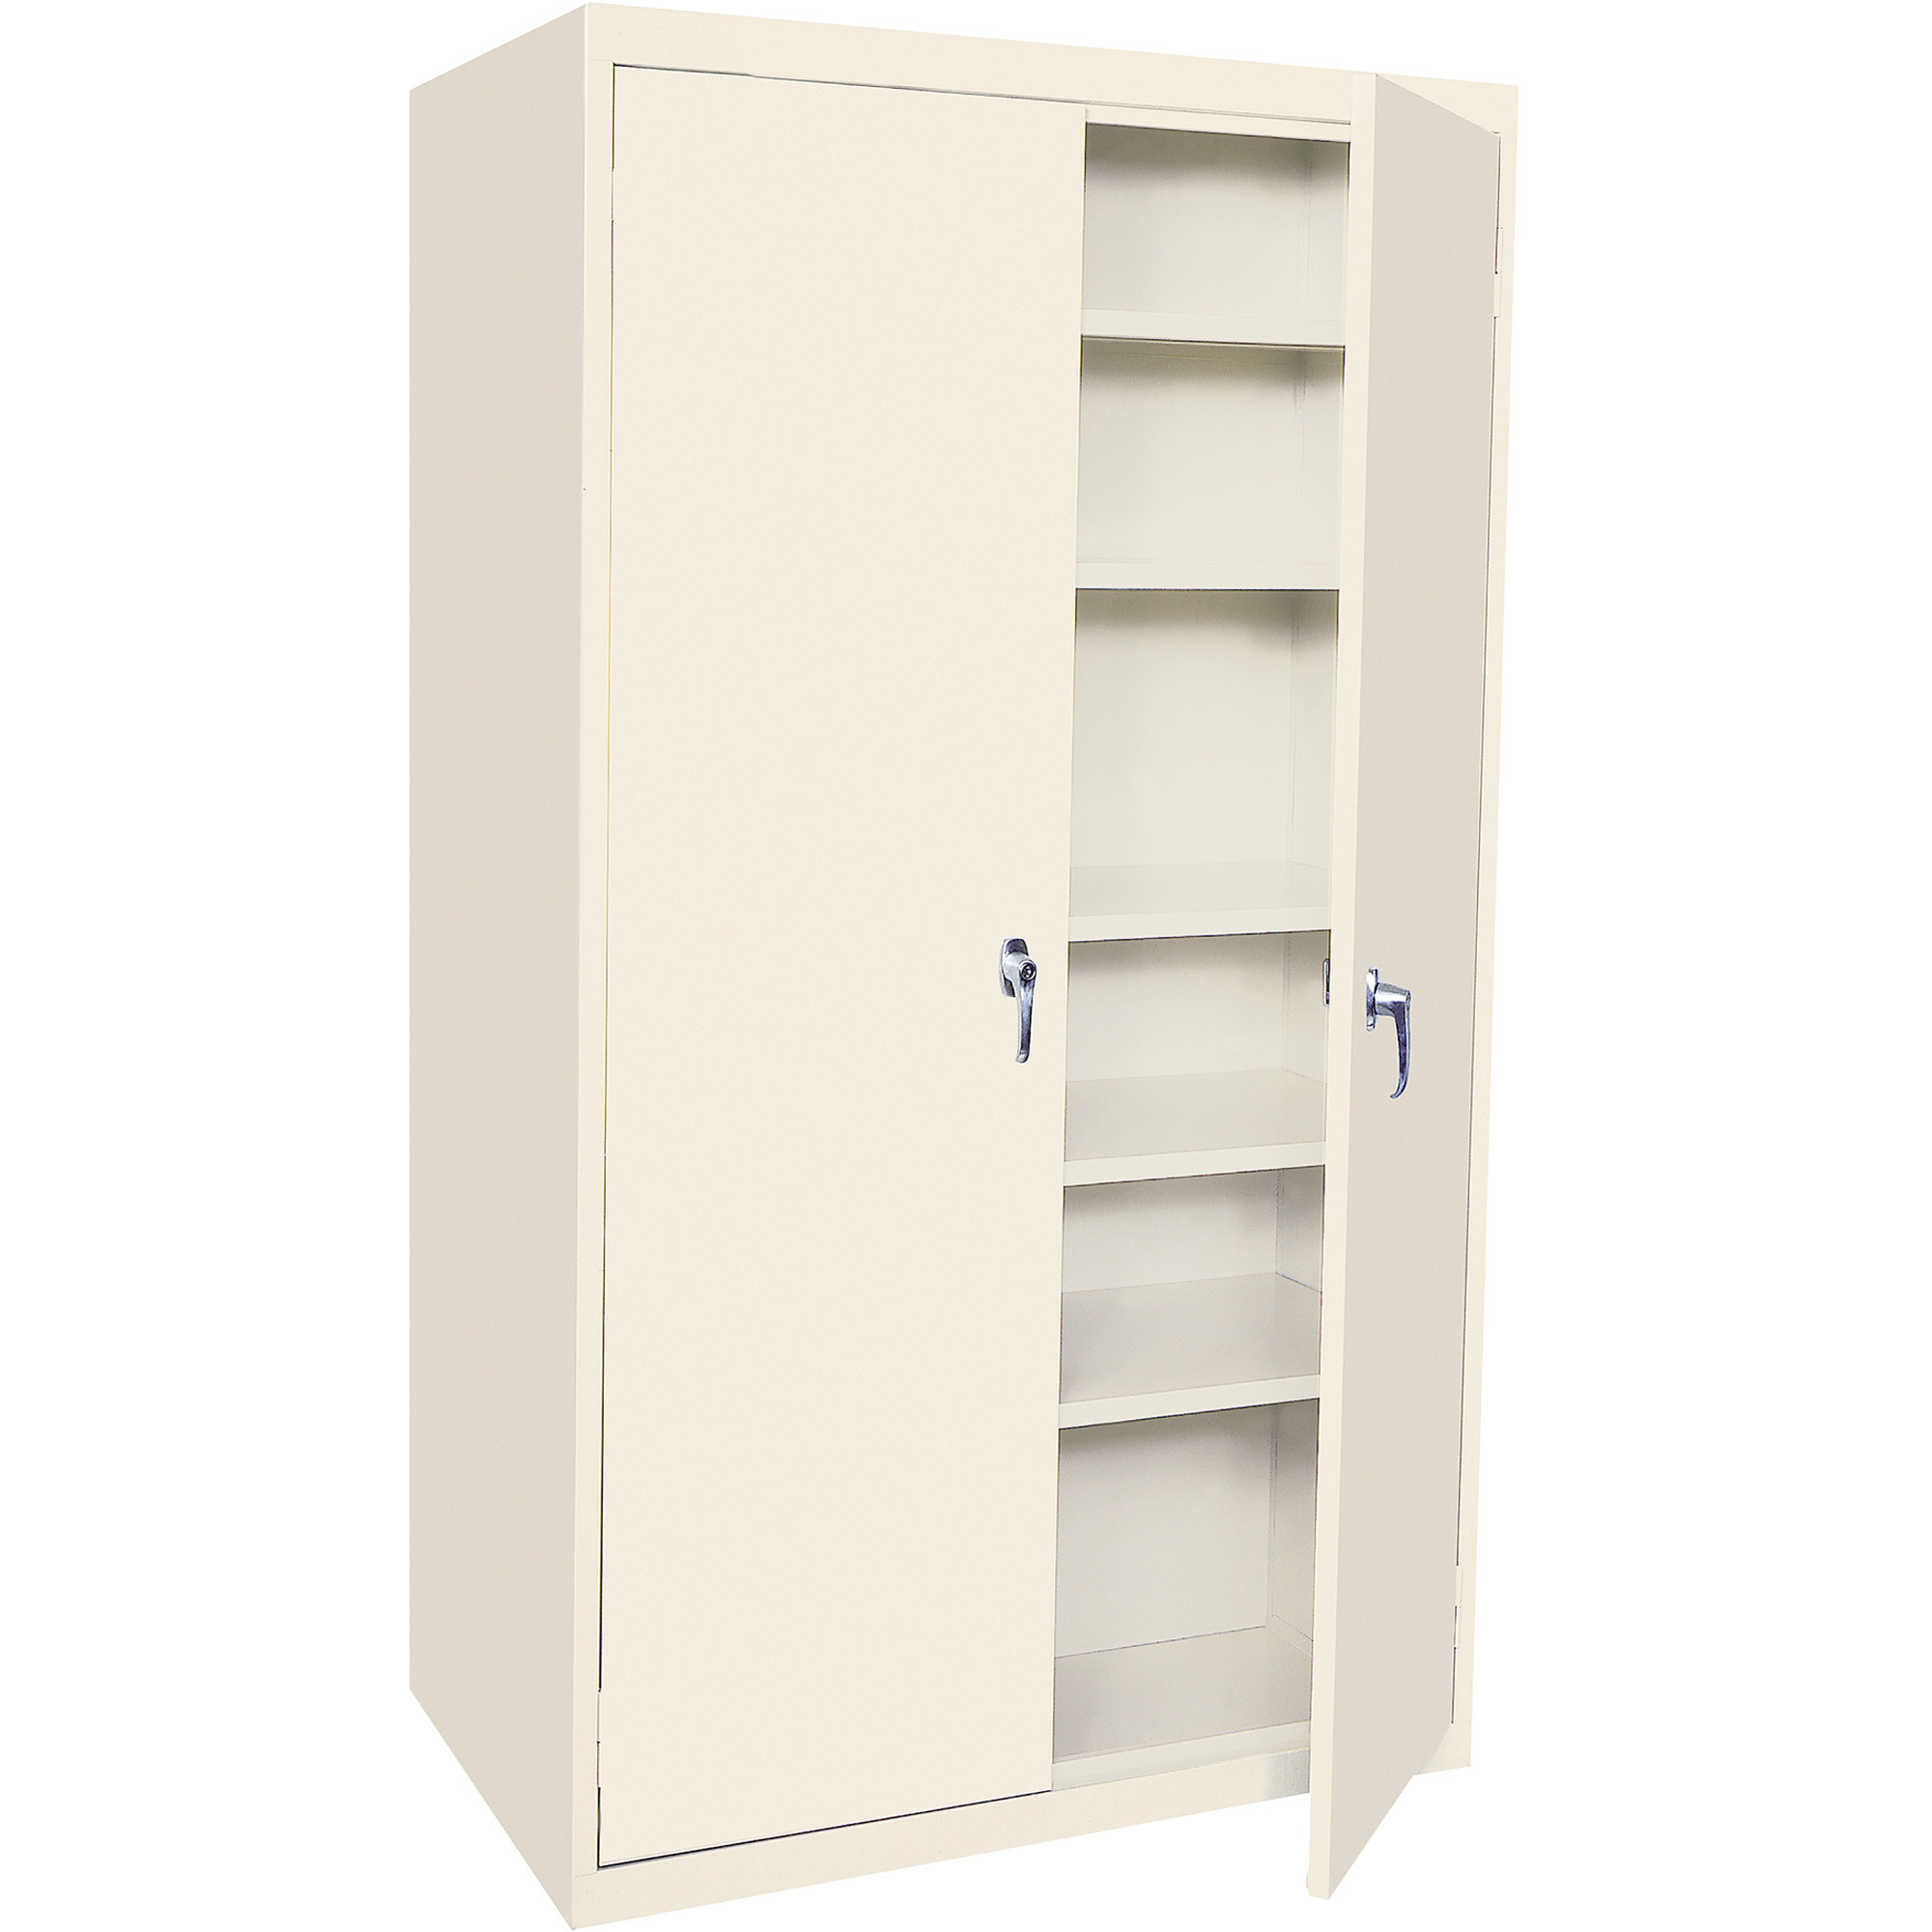 Storage Cabinet — Putty, 5 Fixed Shelves, 36Inch W x 18Inch D x 78Inch H, Model - Steel Cabinets USA 5-7818-FS-P